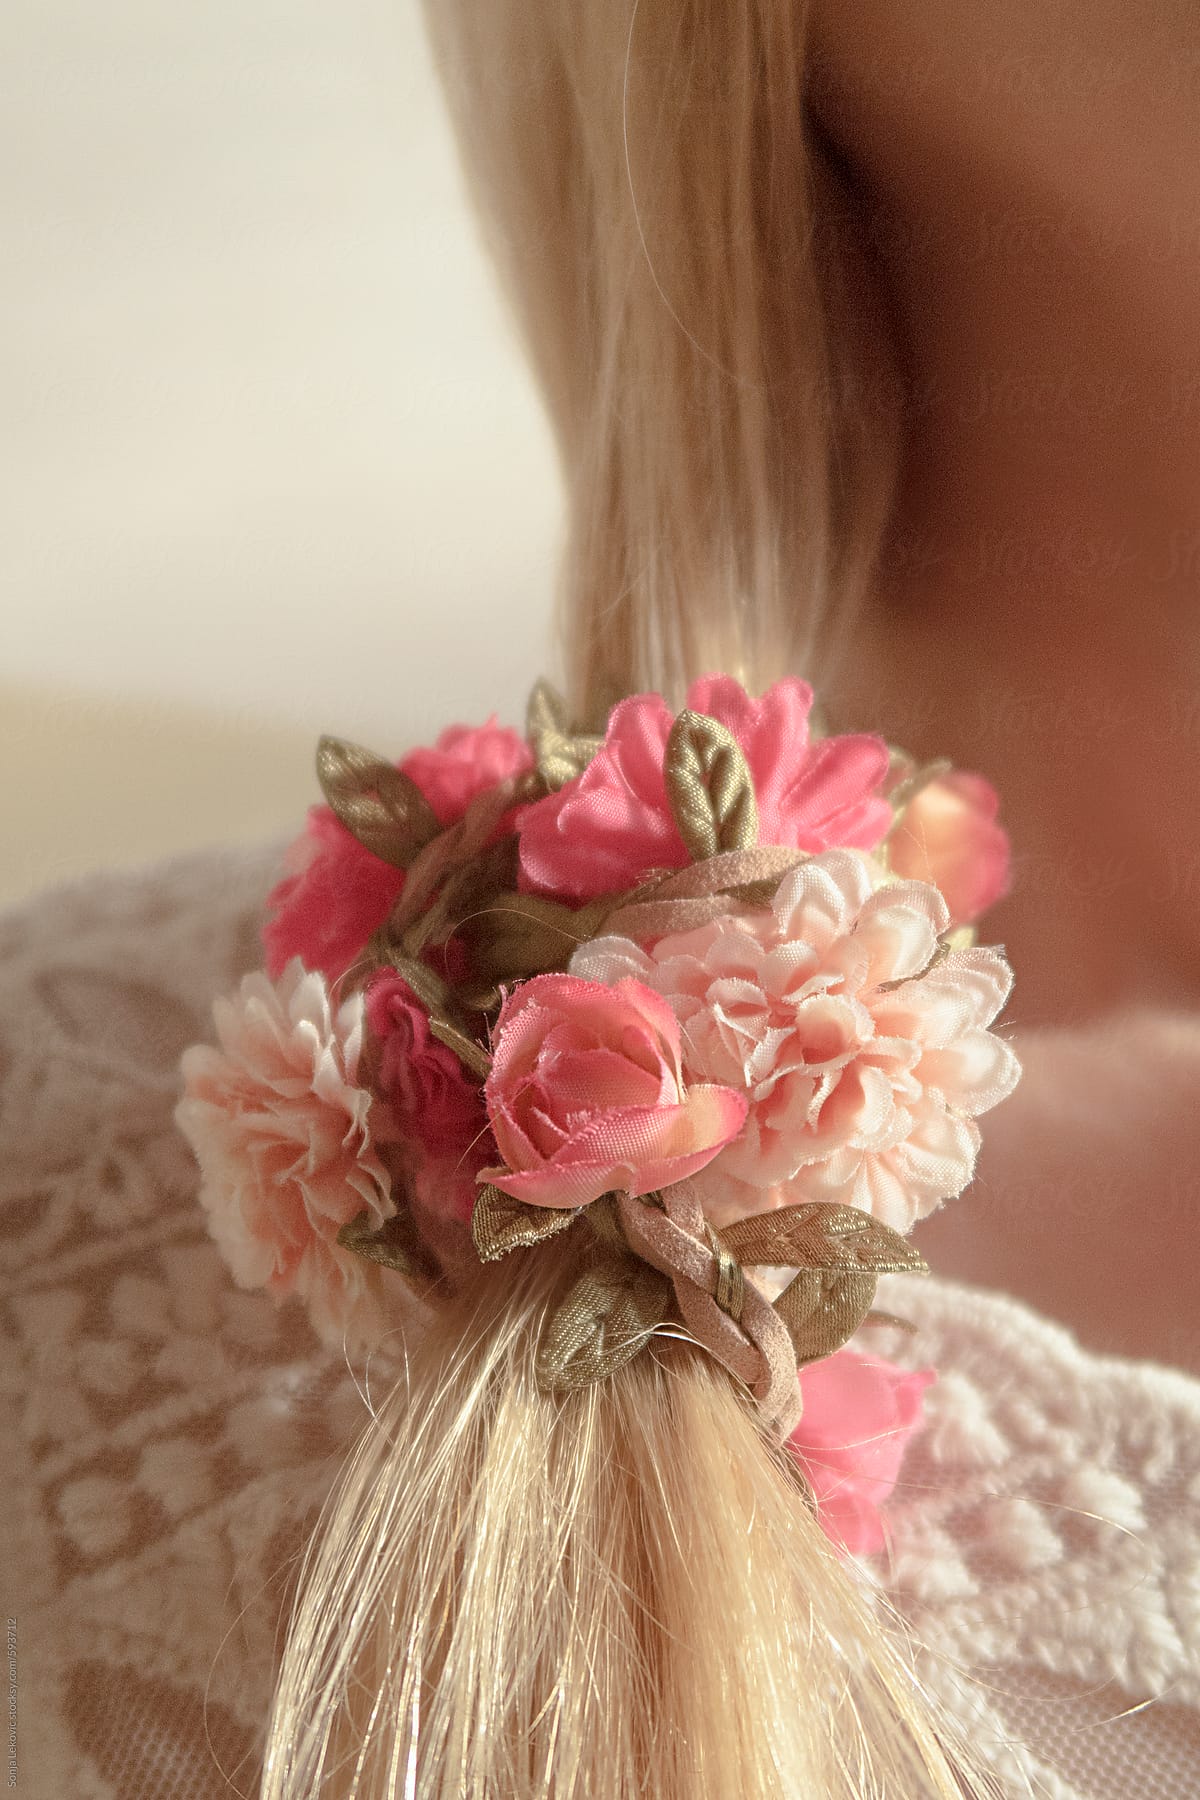 flower rubber band in blond hair closeup